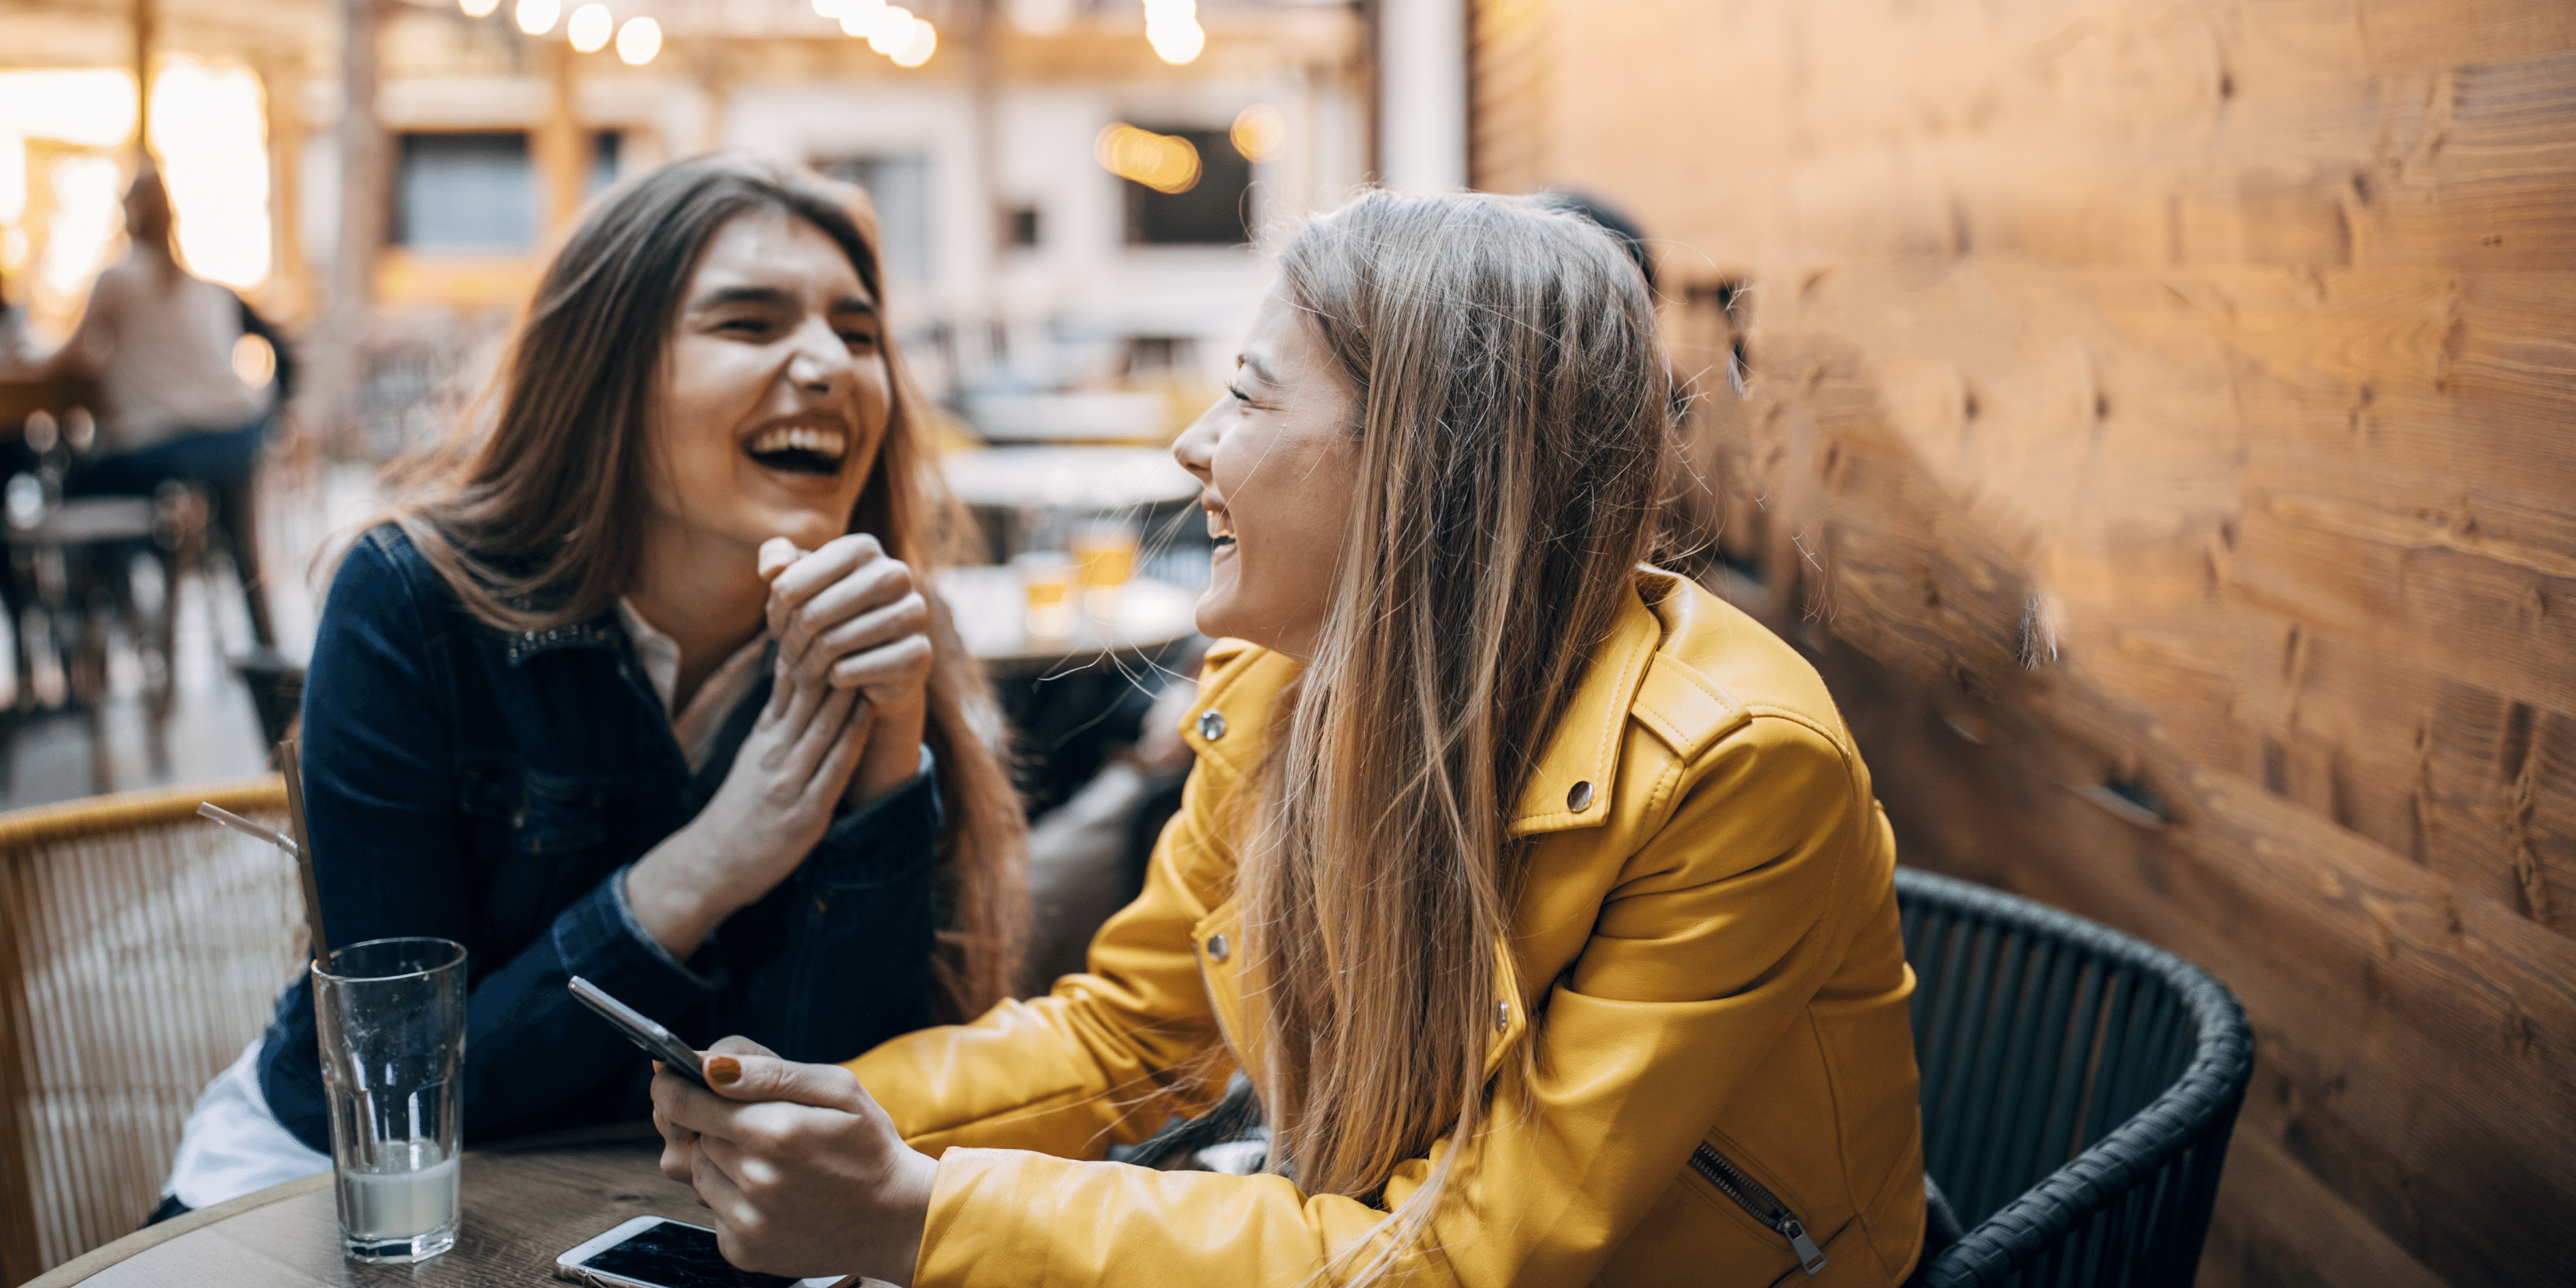 Image of two friends, young women, laughing and catching up at a cafe